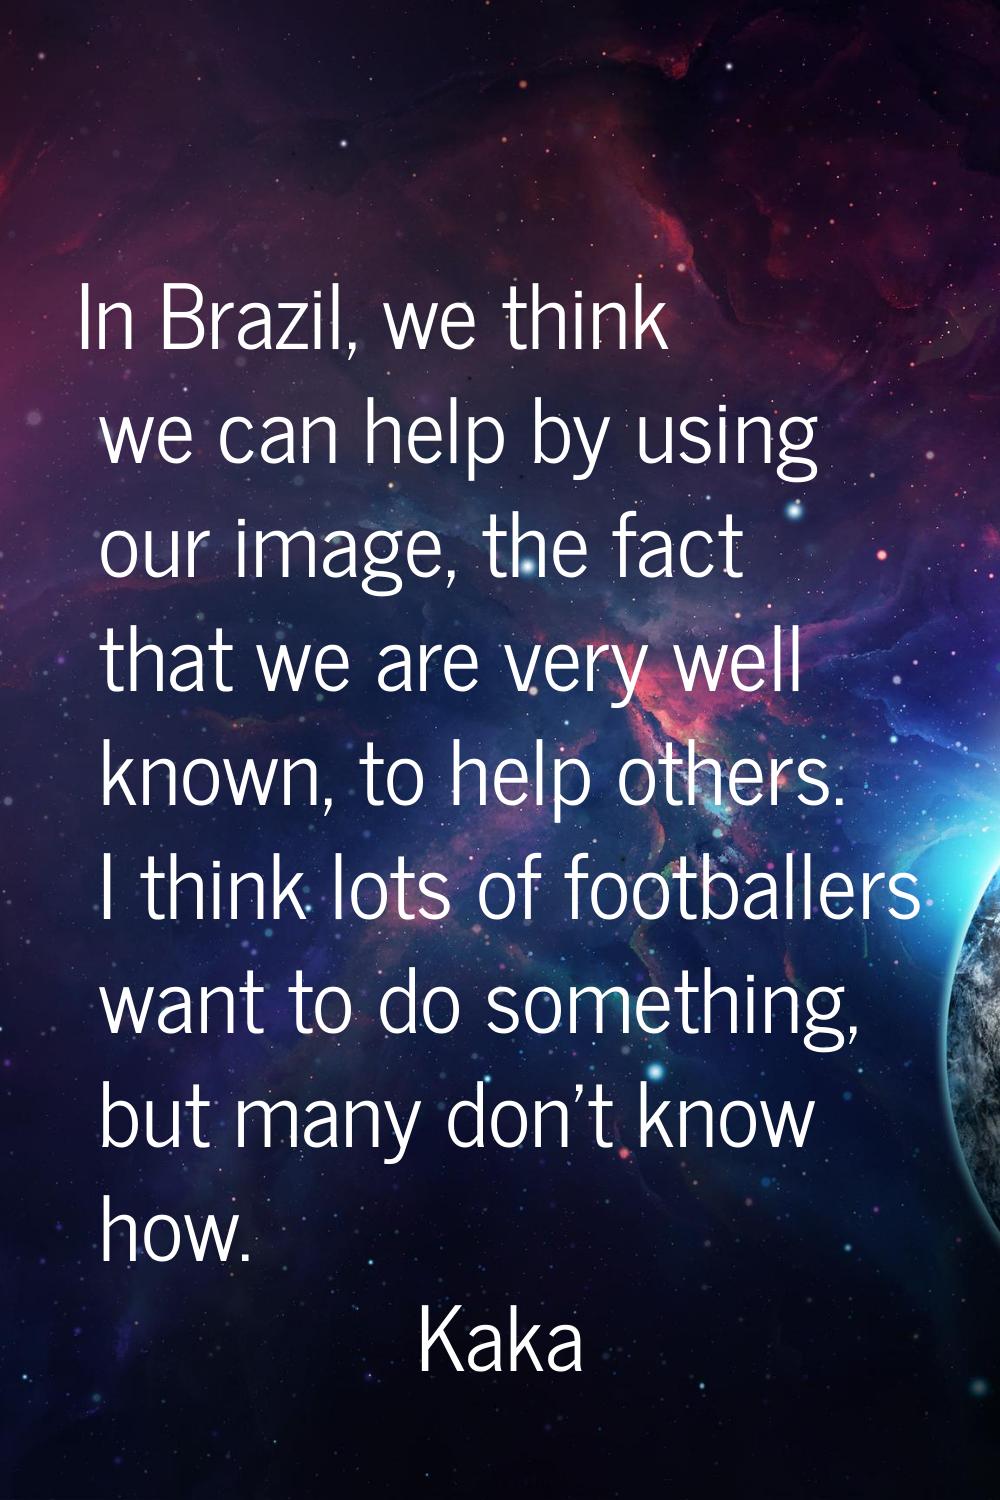 In Brazil, we think we can help by using our image, the fact that we are very well known, to help o